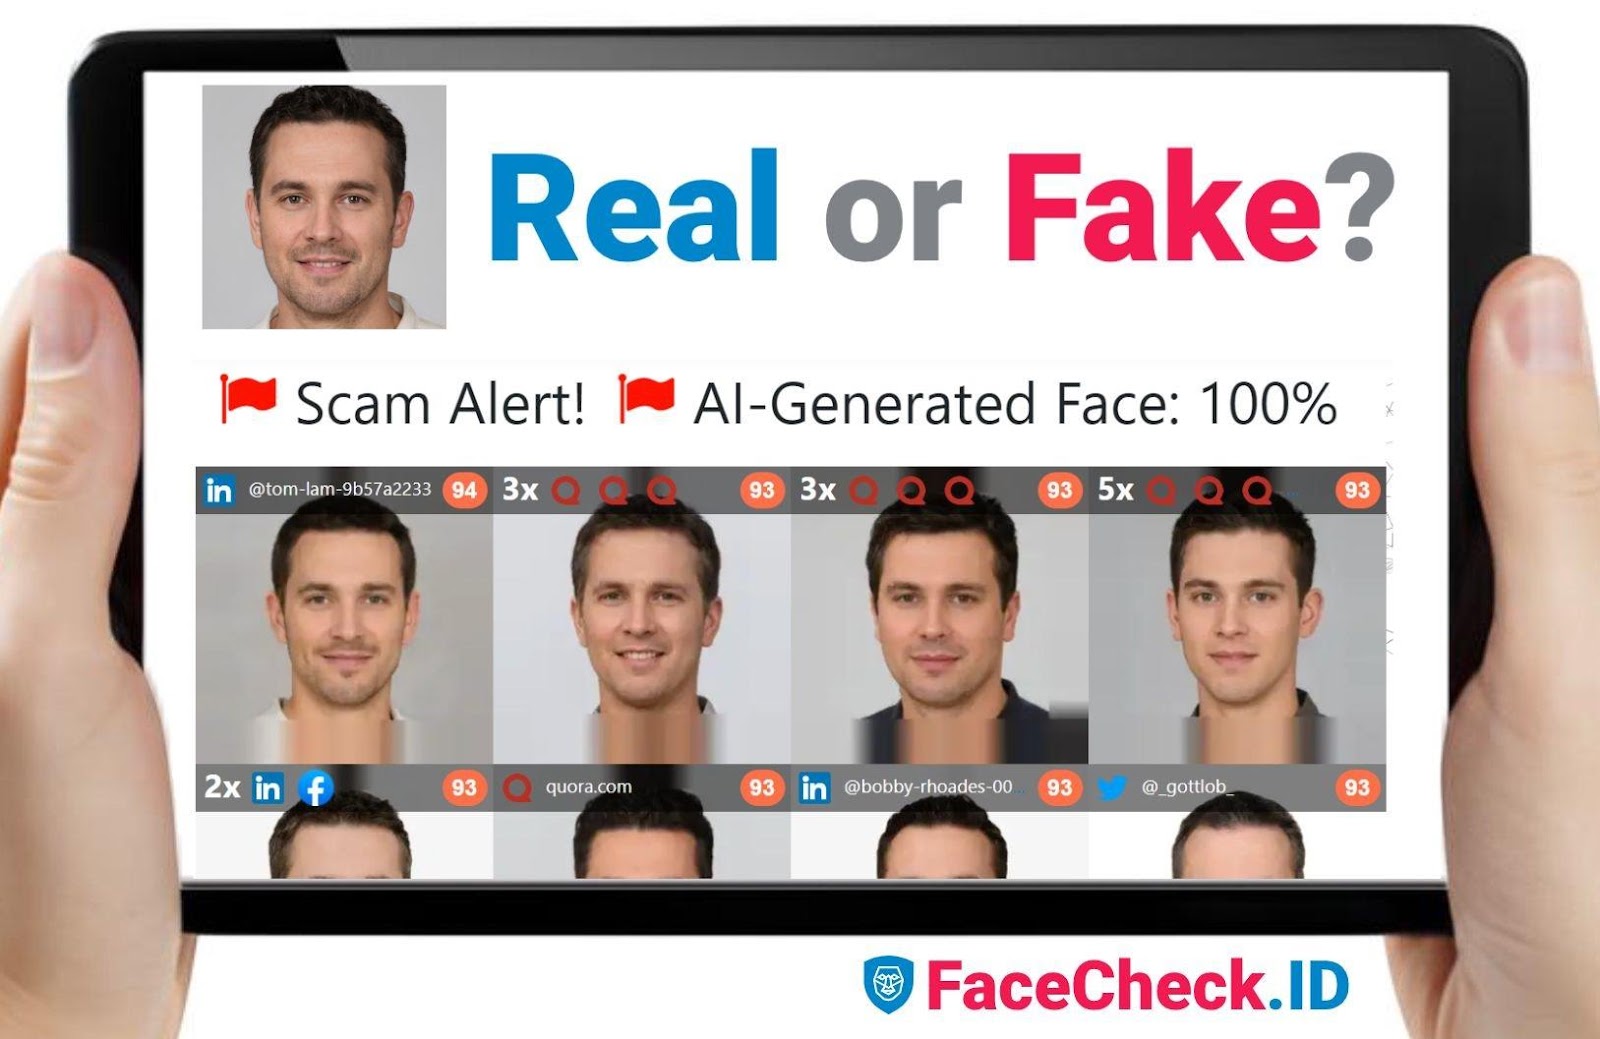 FaceCheck.ID uses artificial intelligence to detect AI-generated faces